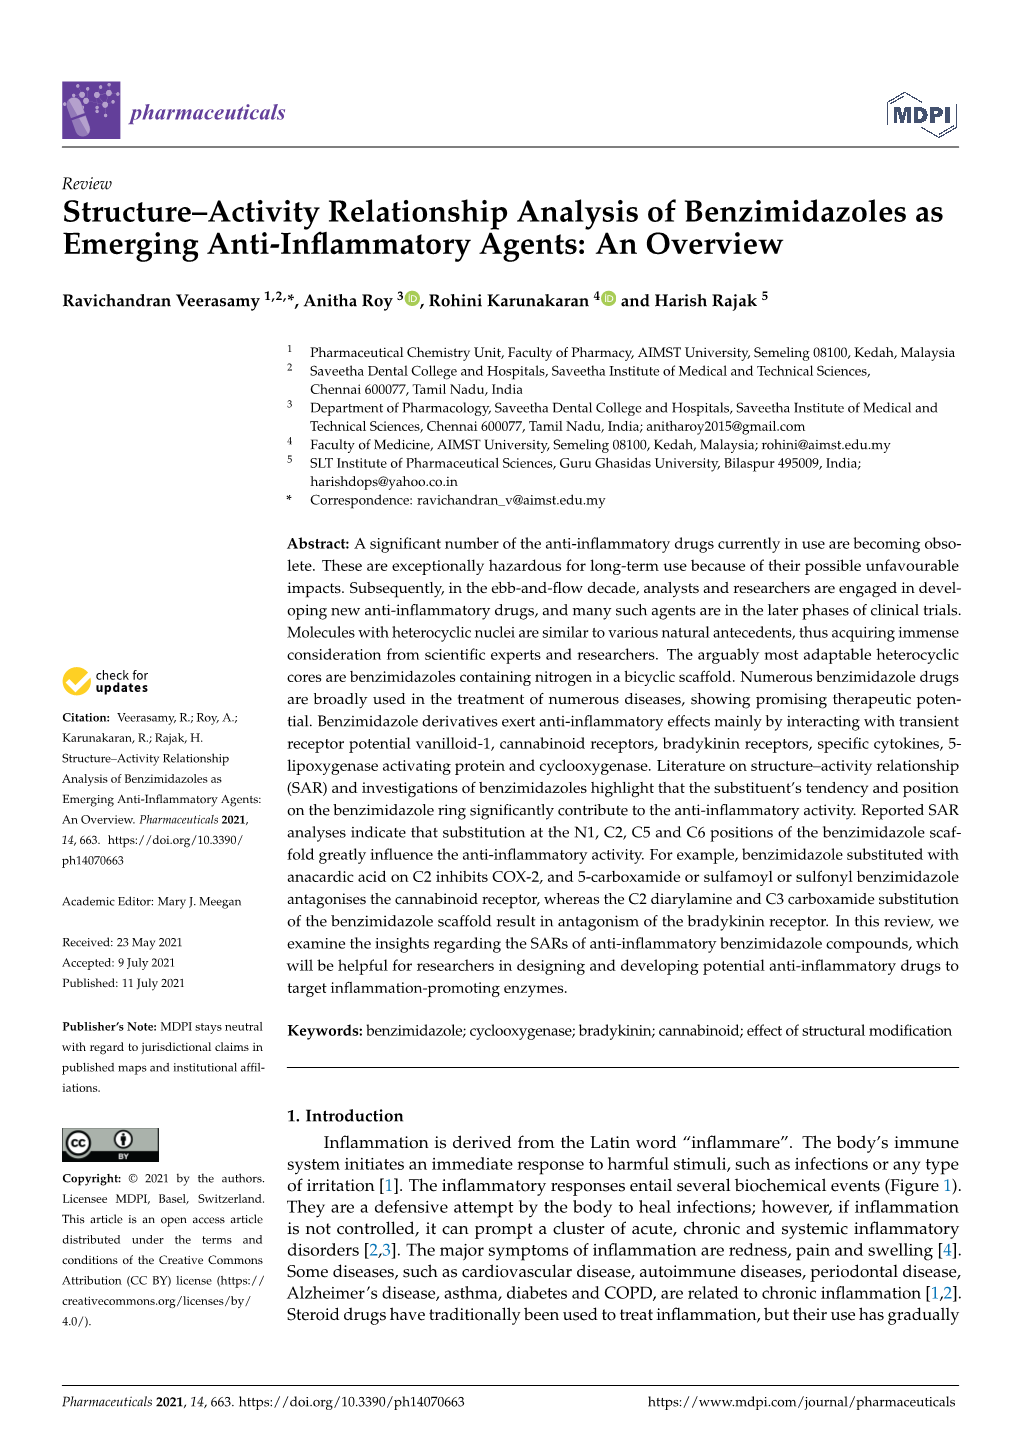 Structure–Activity Relationship Analysis of Benzimidazoles As Emerging Anti-Inﬂammatory Agents: an Overview